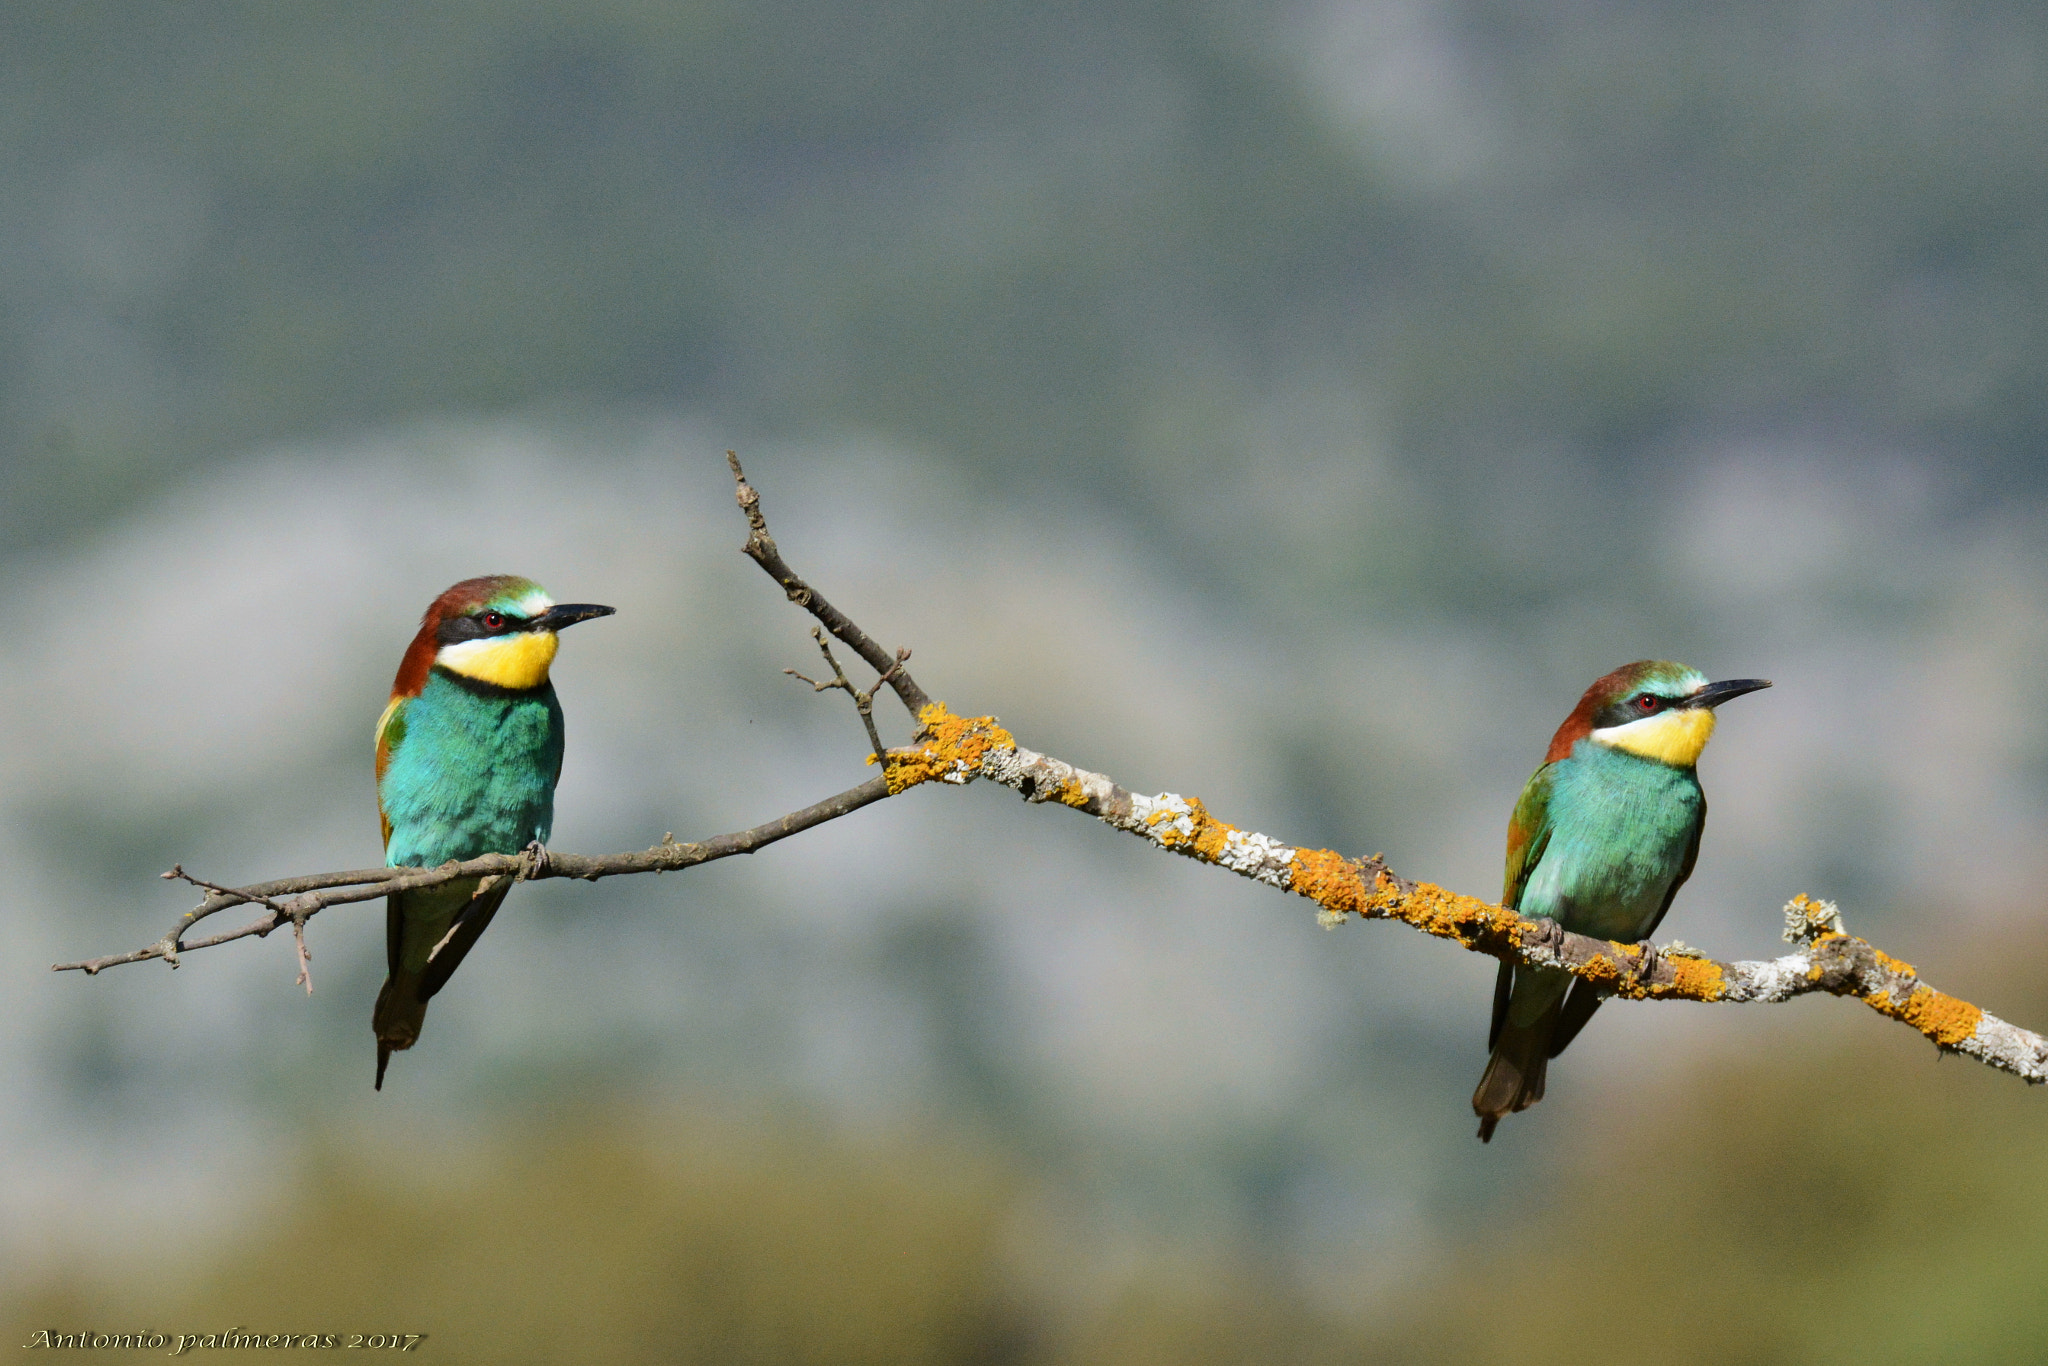 Sigma 150-600mm F5-6.3 DG OS HSM | S sample photo. Abejaruco europeo (merops apiaster) photography